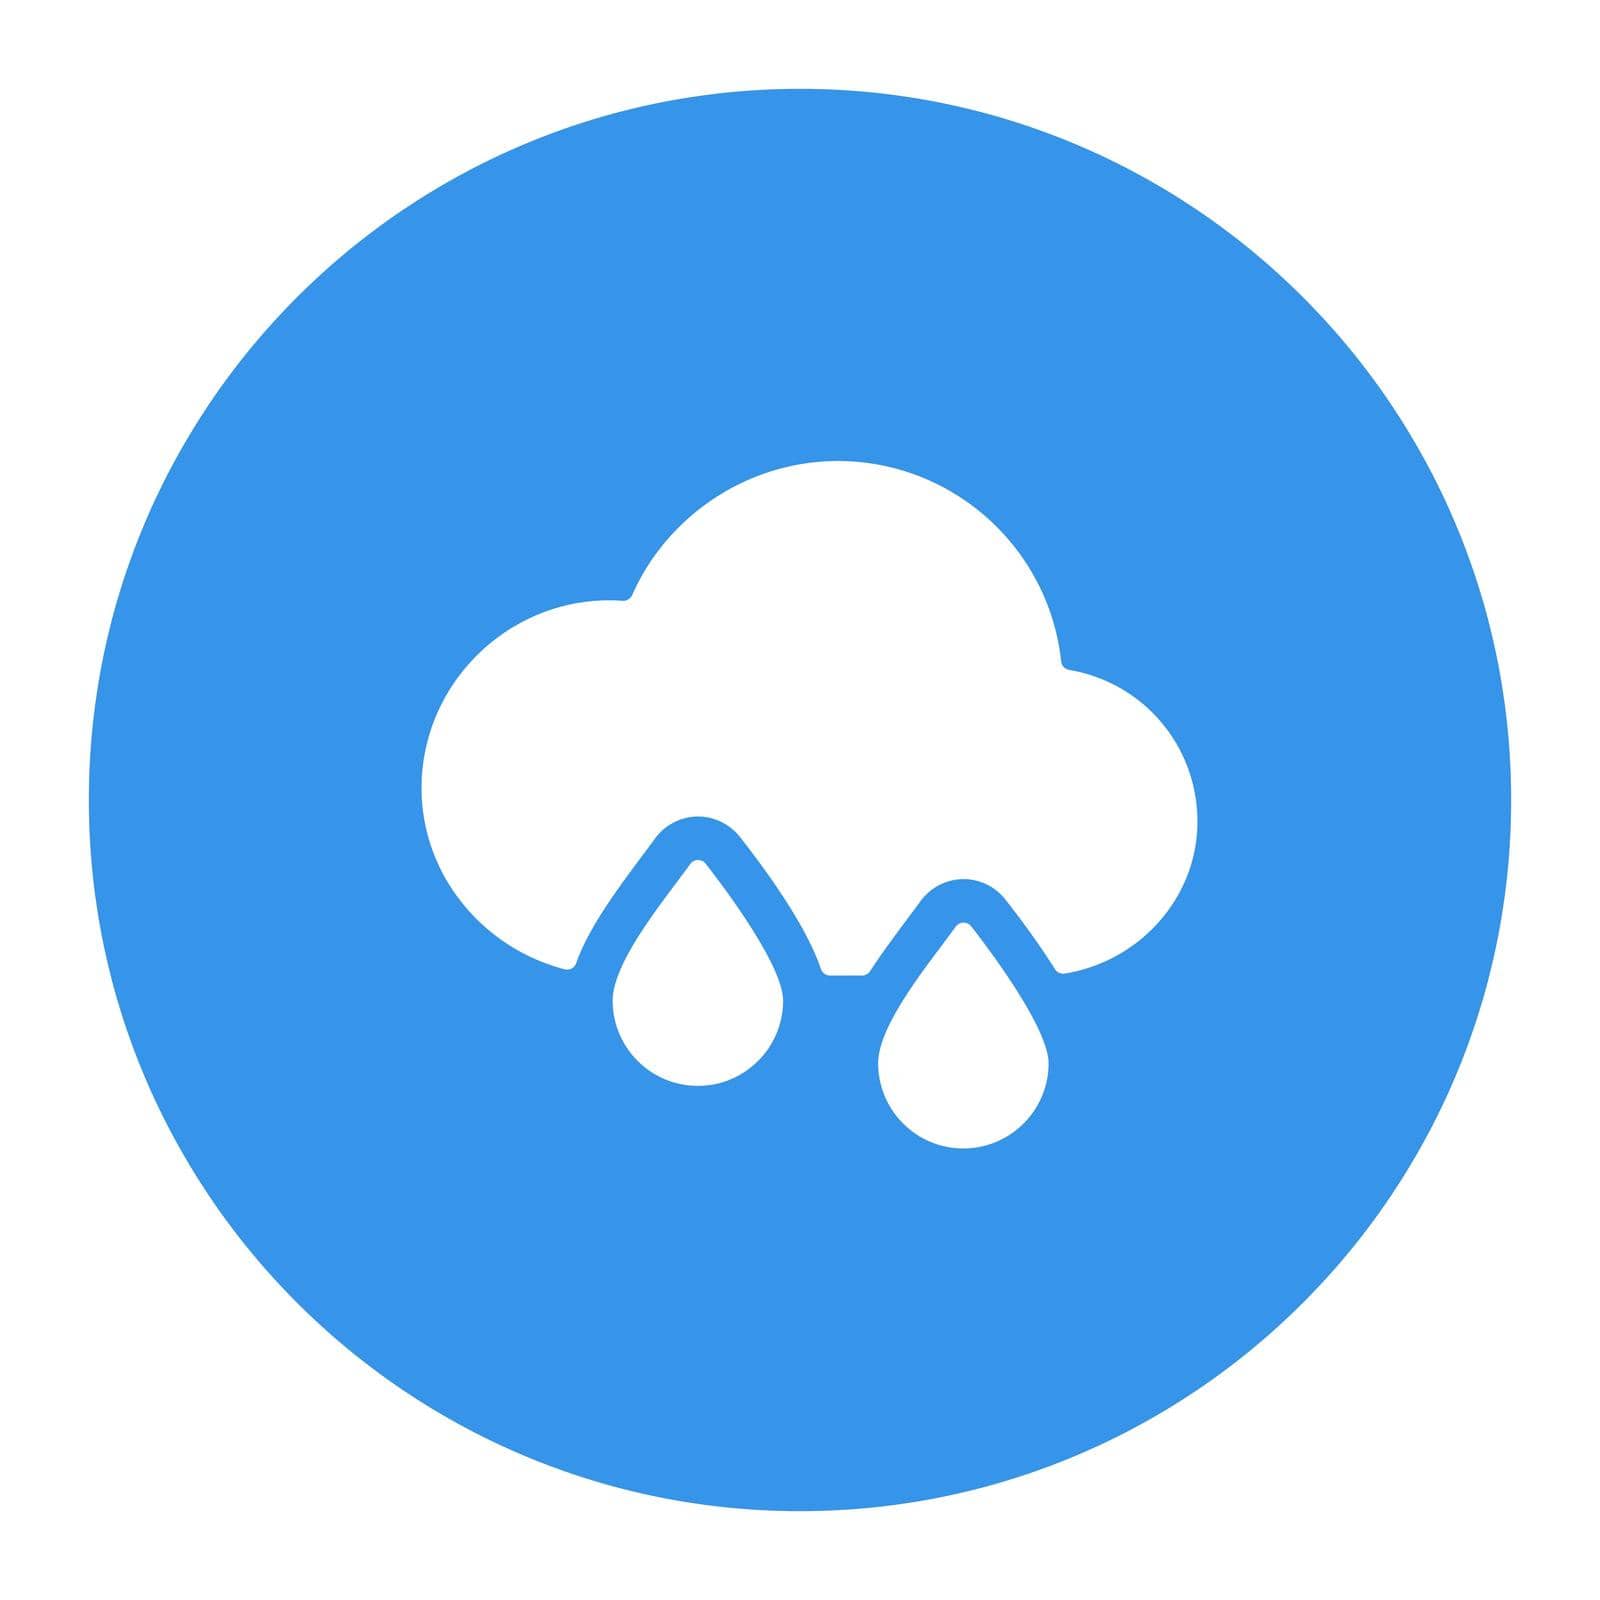 Raincloud with raindrops glyph icon. Weather sign by nosik